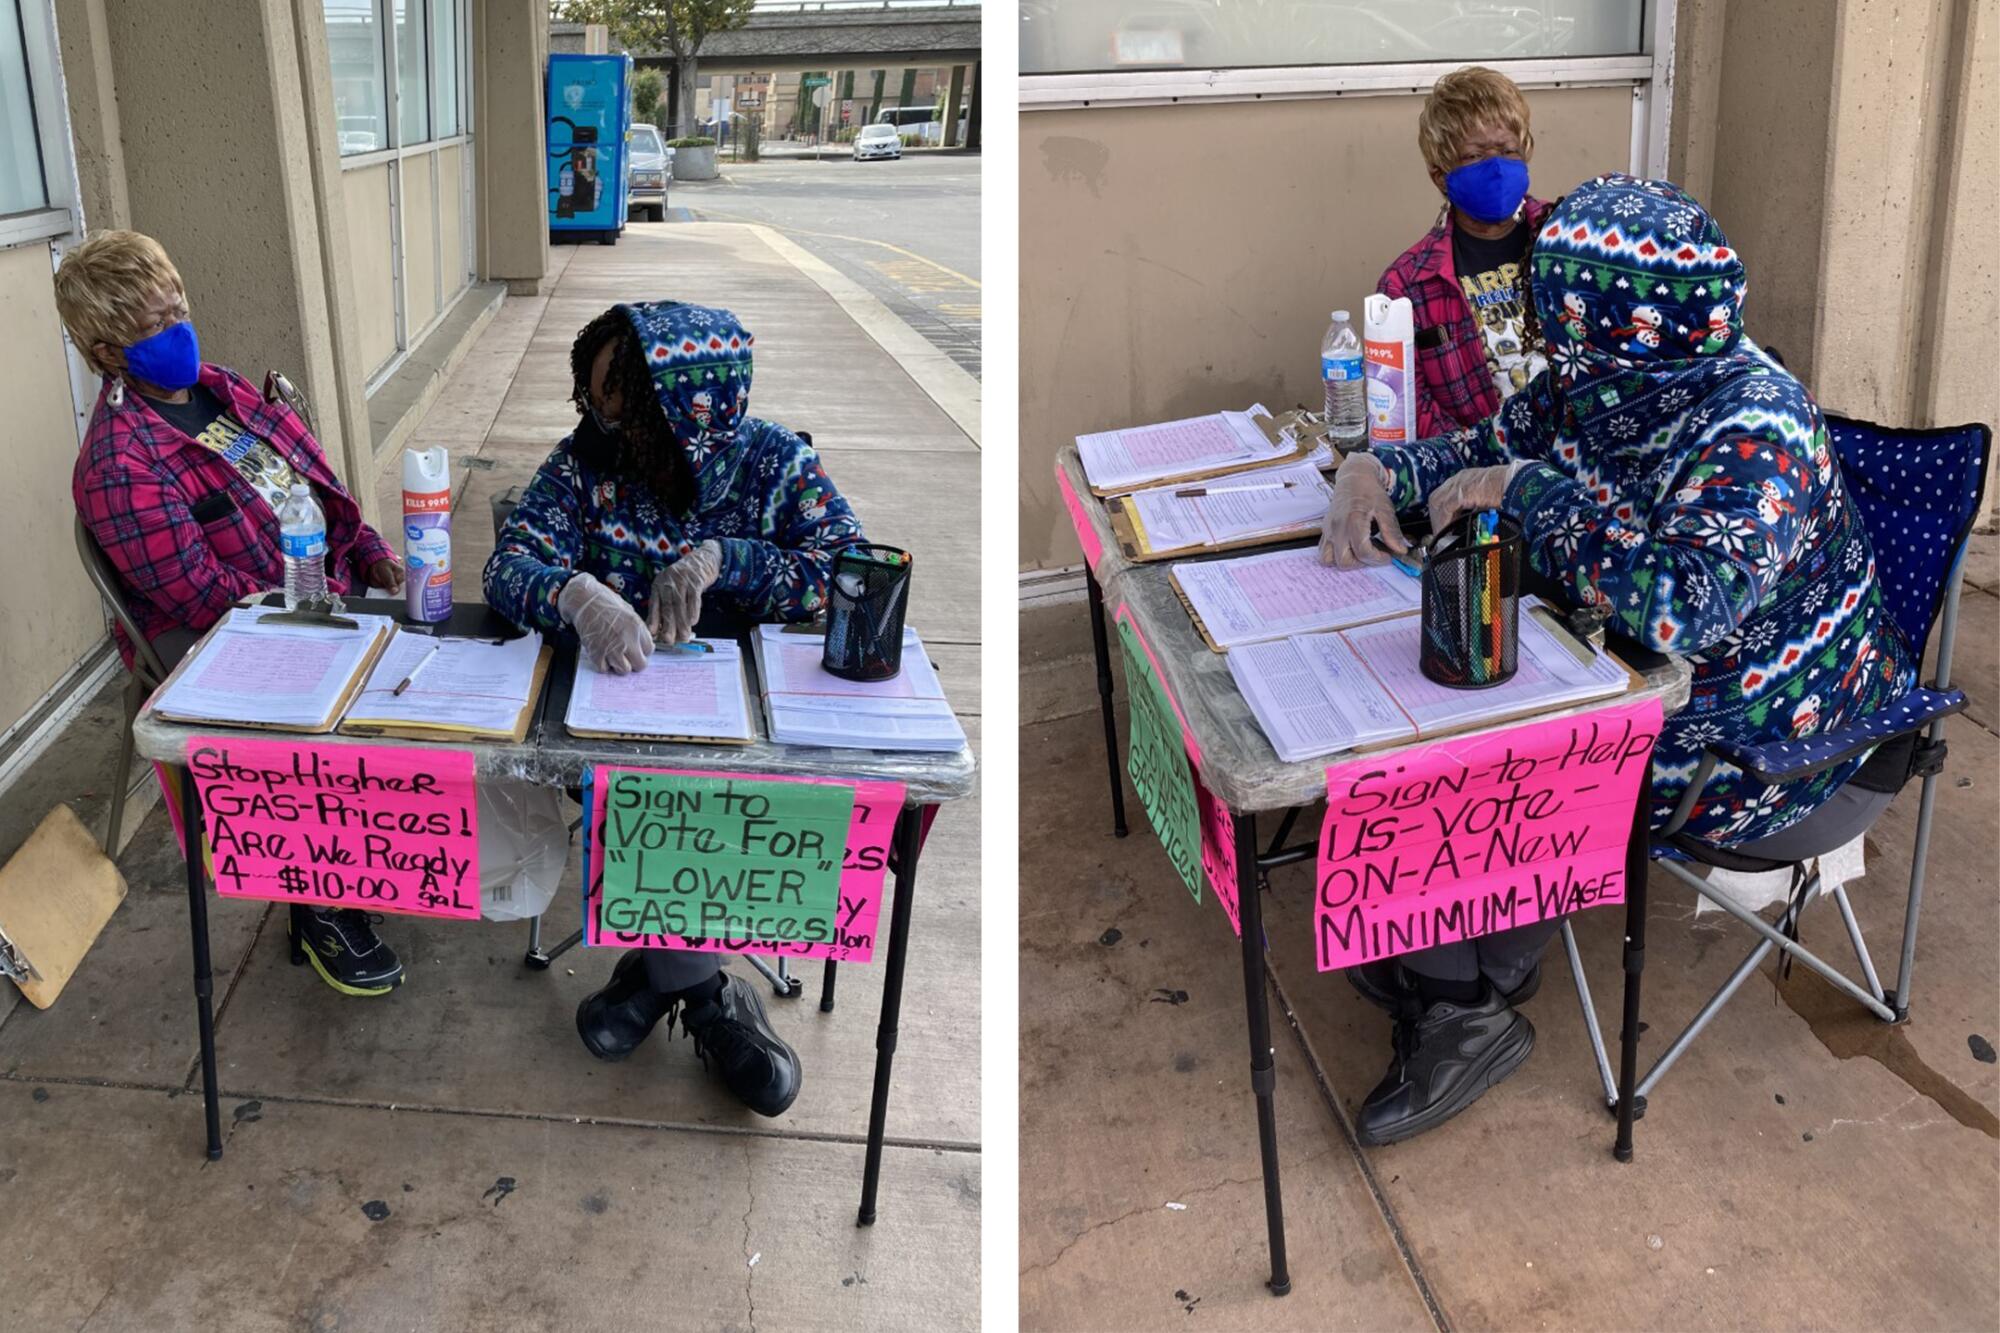 Two signature gatherers set up shop outside a Safeway in Oakland.